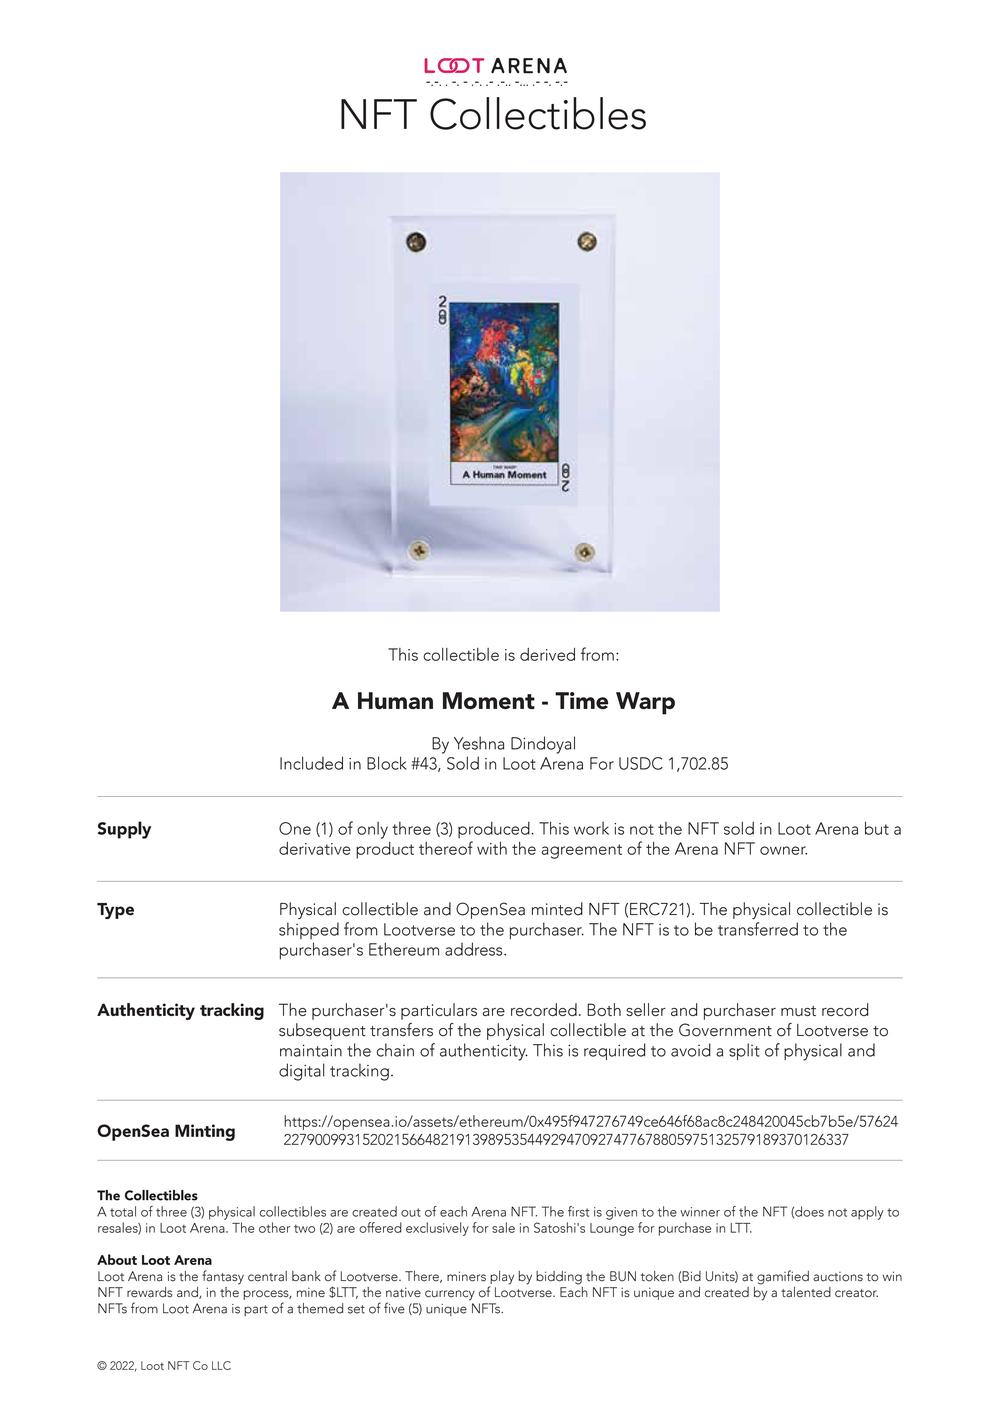 A Human Moment_#1 Collectible_Contract.pdf